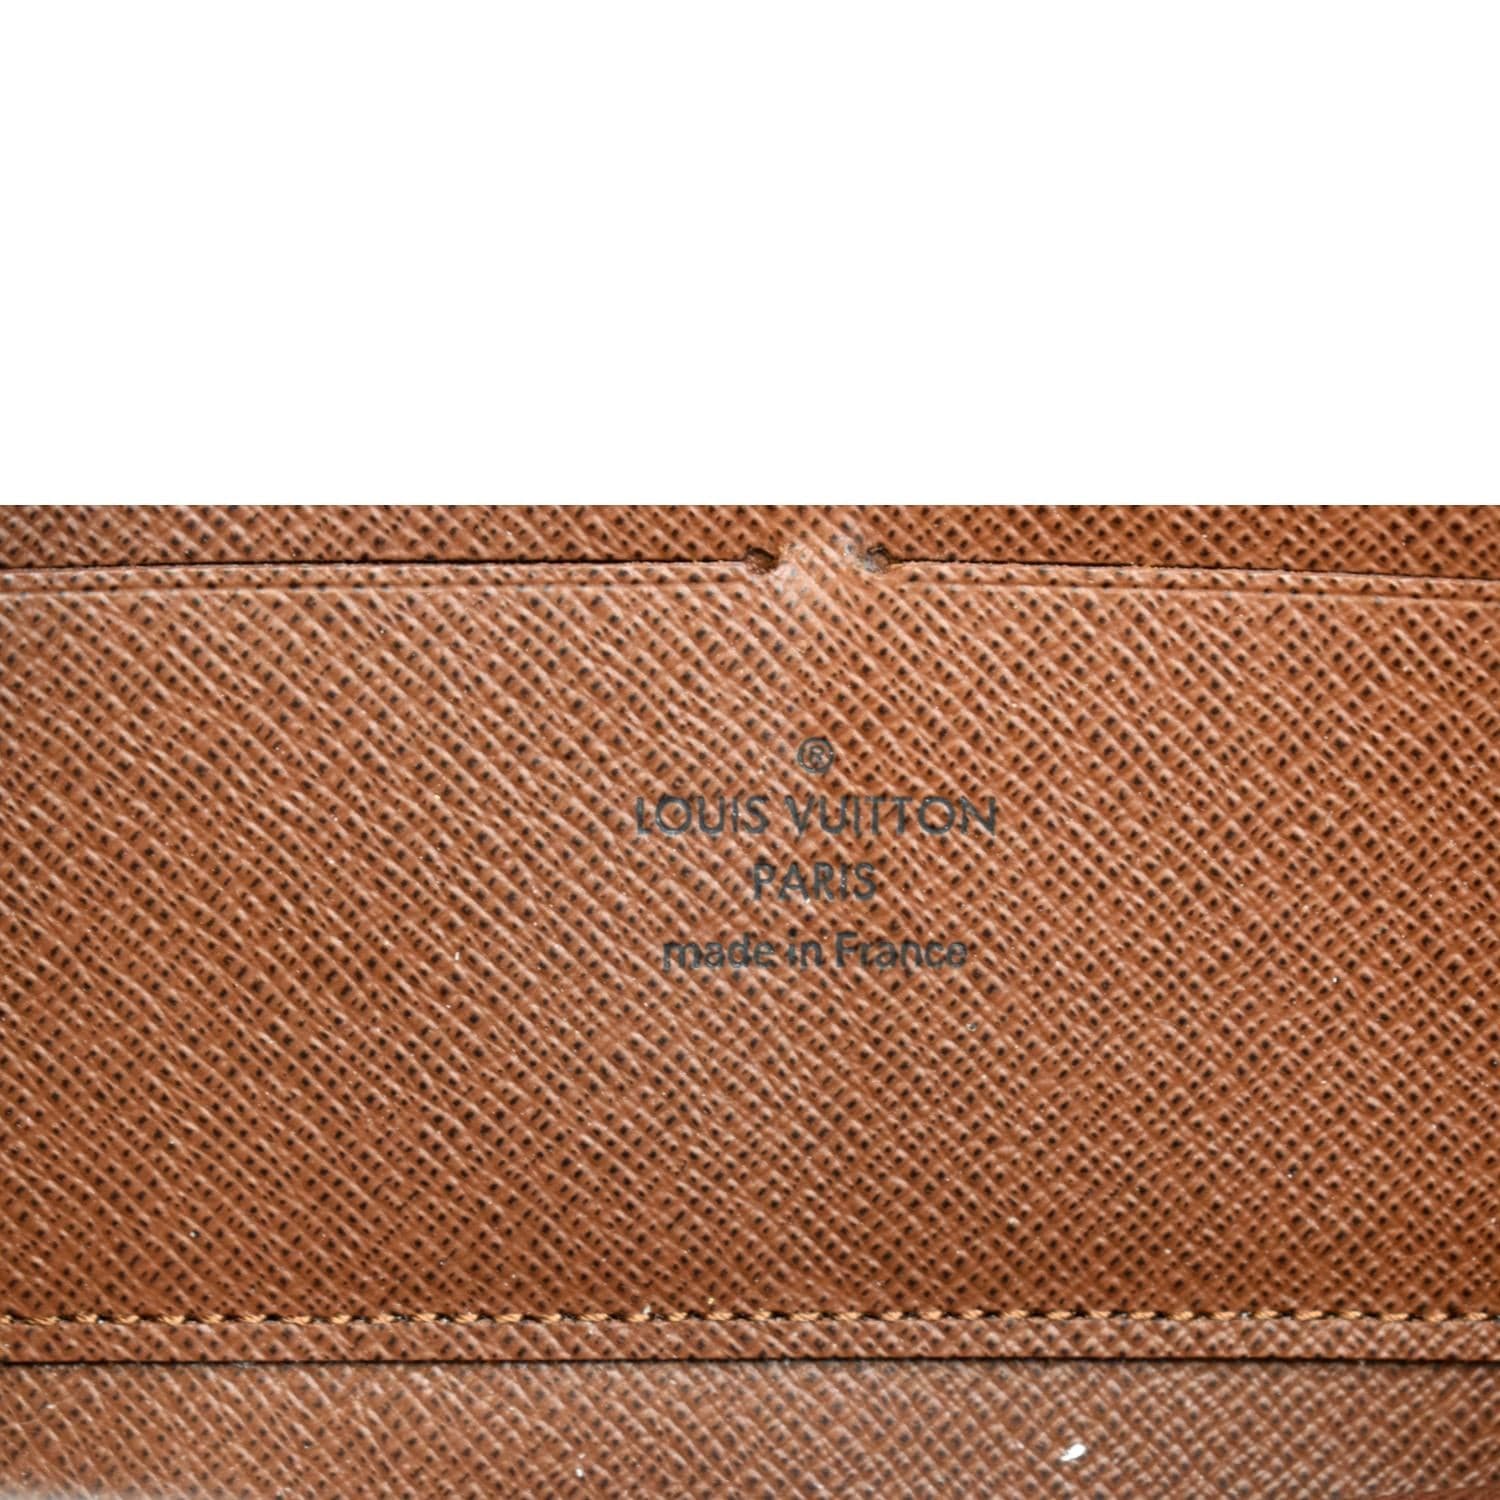 LOUIS VUITTON LV Broderie Anglaise Zippy Long Wallet M82471